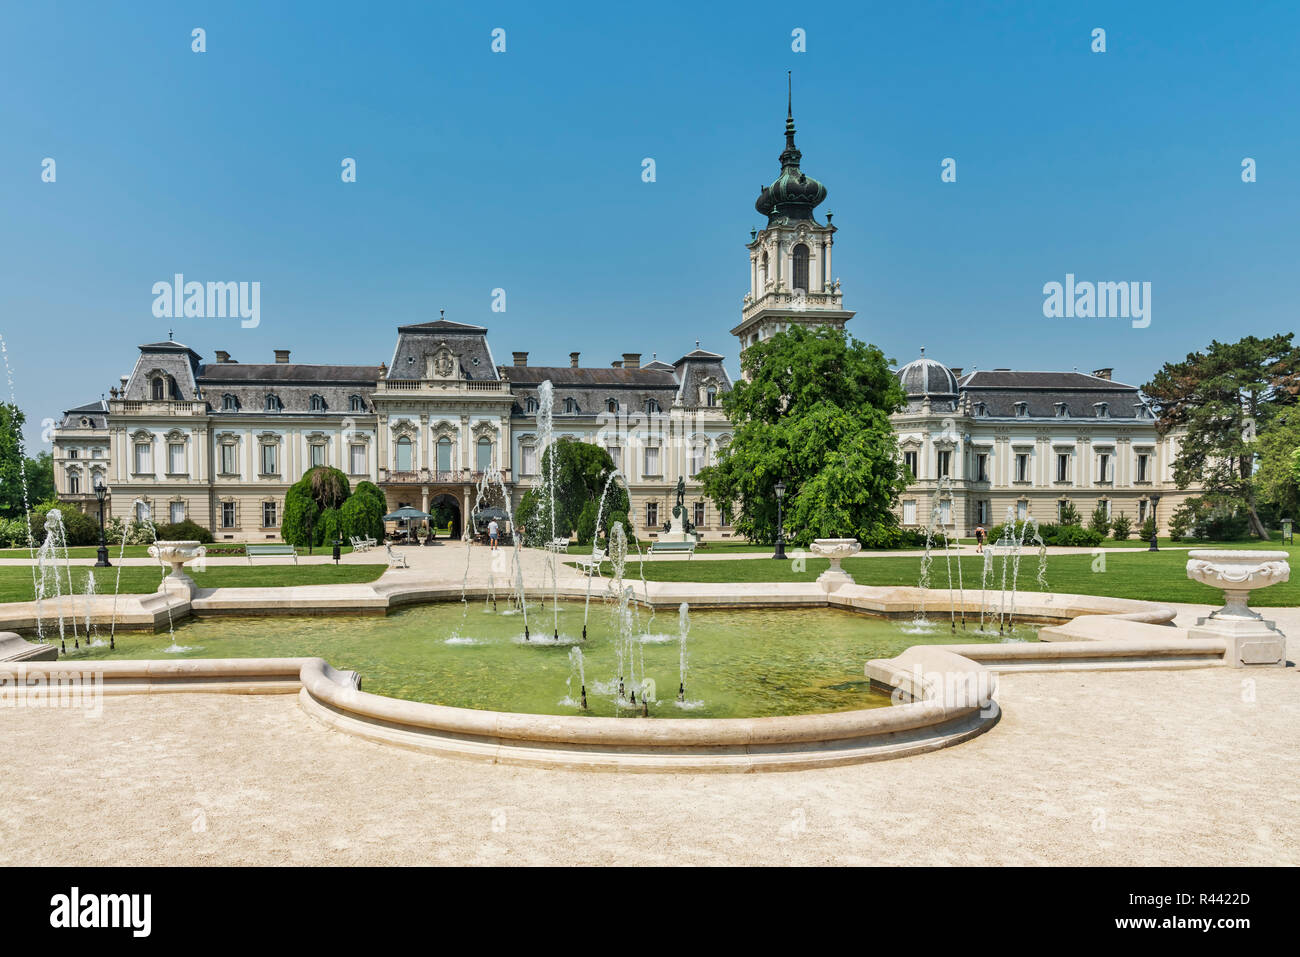 The Festetics Palace is a Baroque palace located in the town of Keszthely, Zala county, Hungary, Europe. Stock Photo